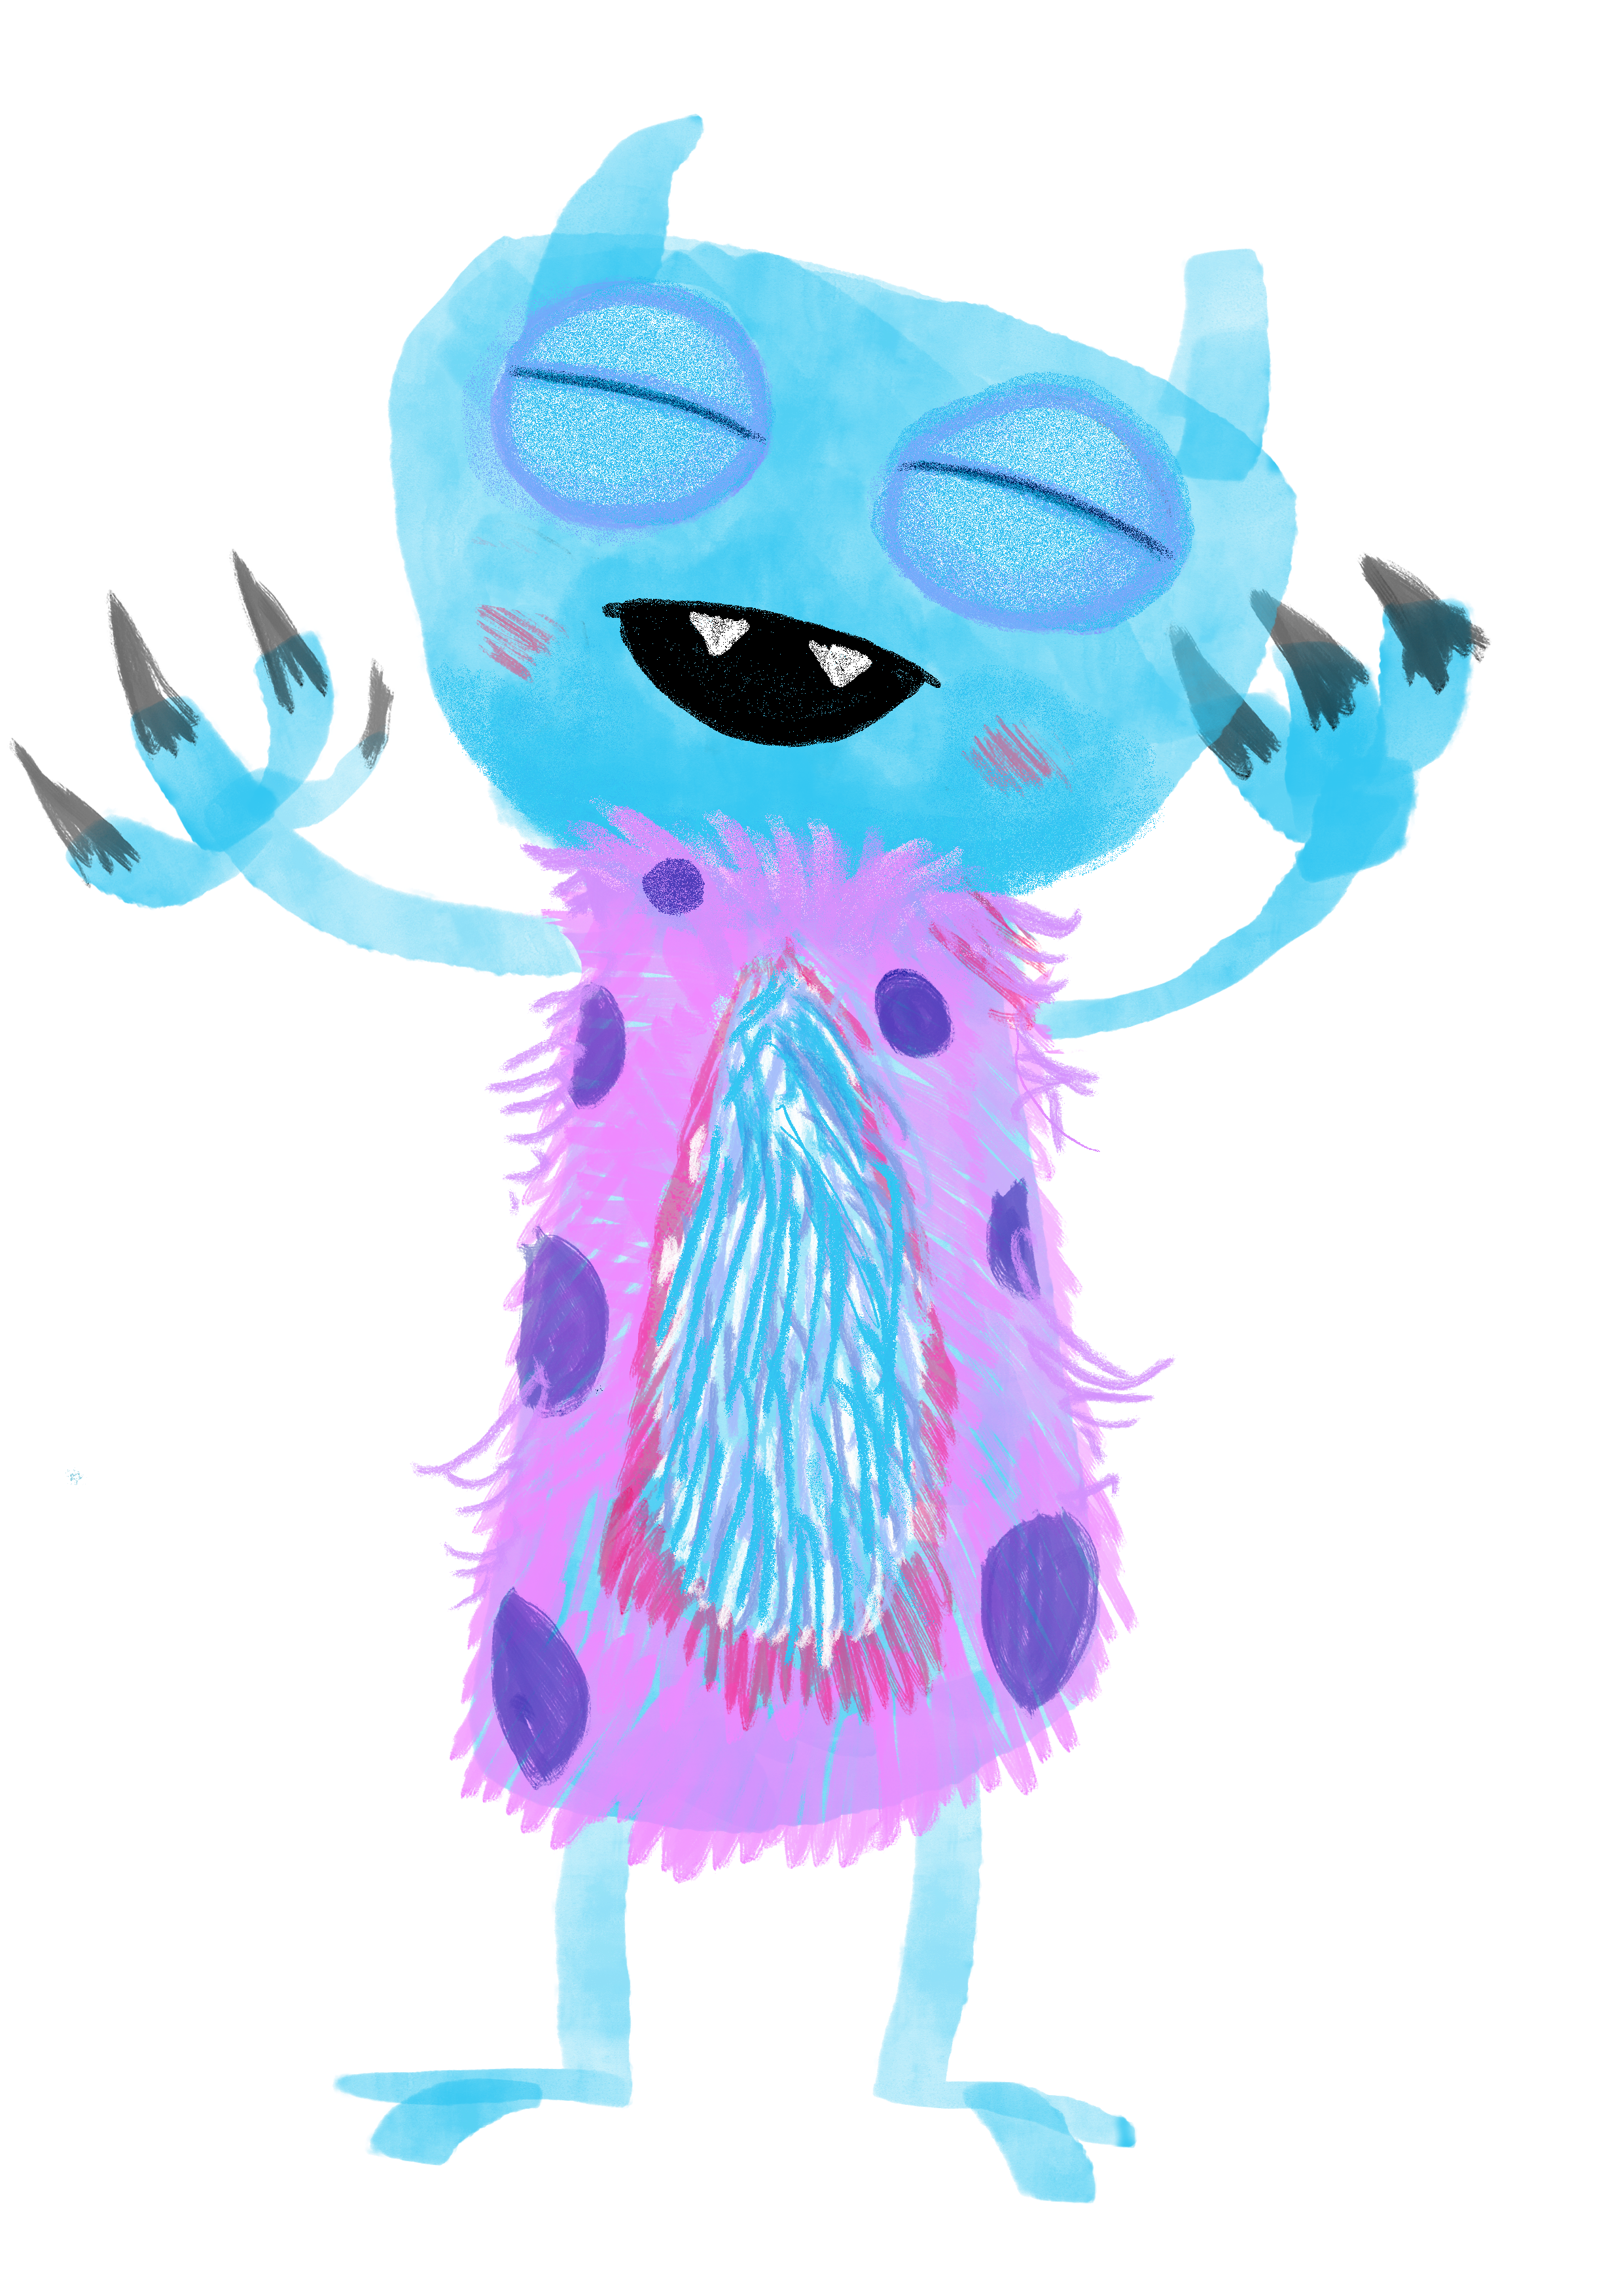 An image of the worry Monster; A light-blue, friendly looking critter with a purple-and-pink polka-dot body